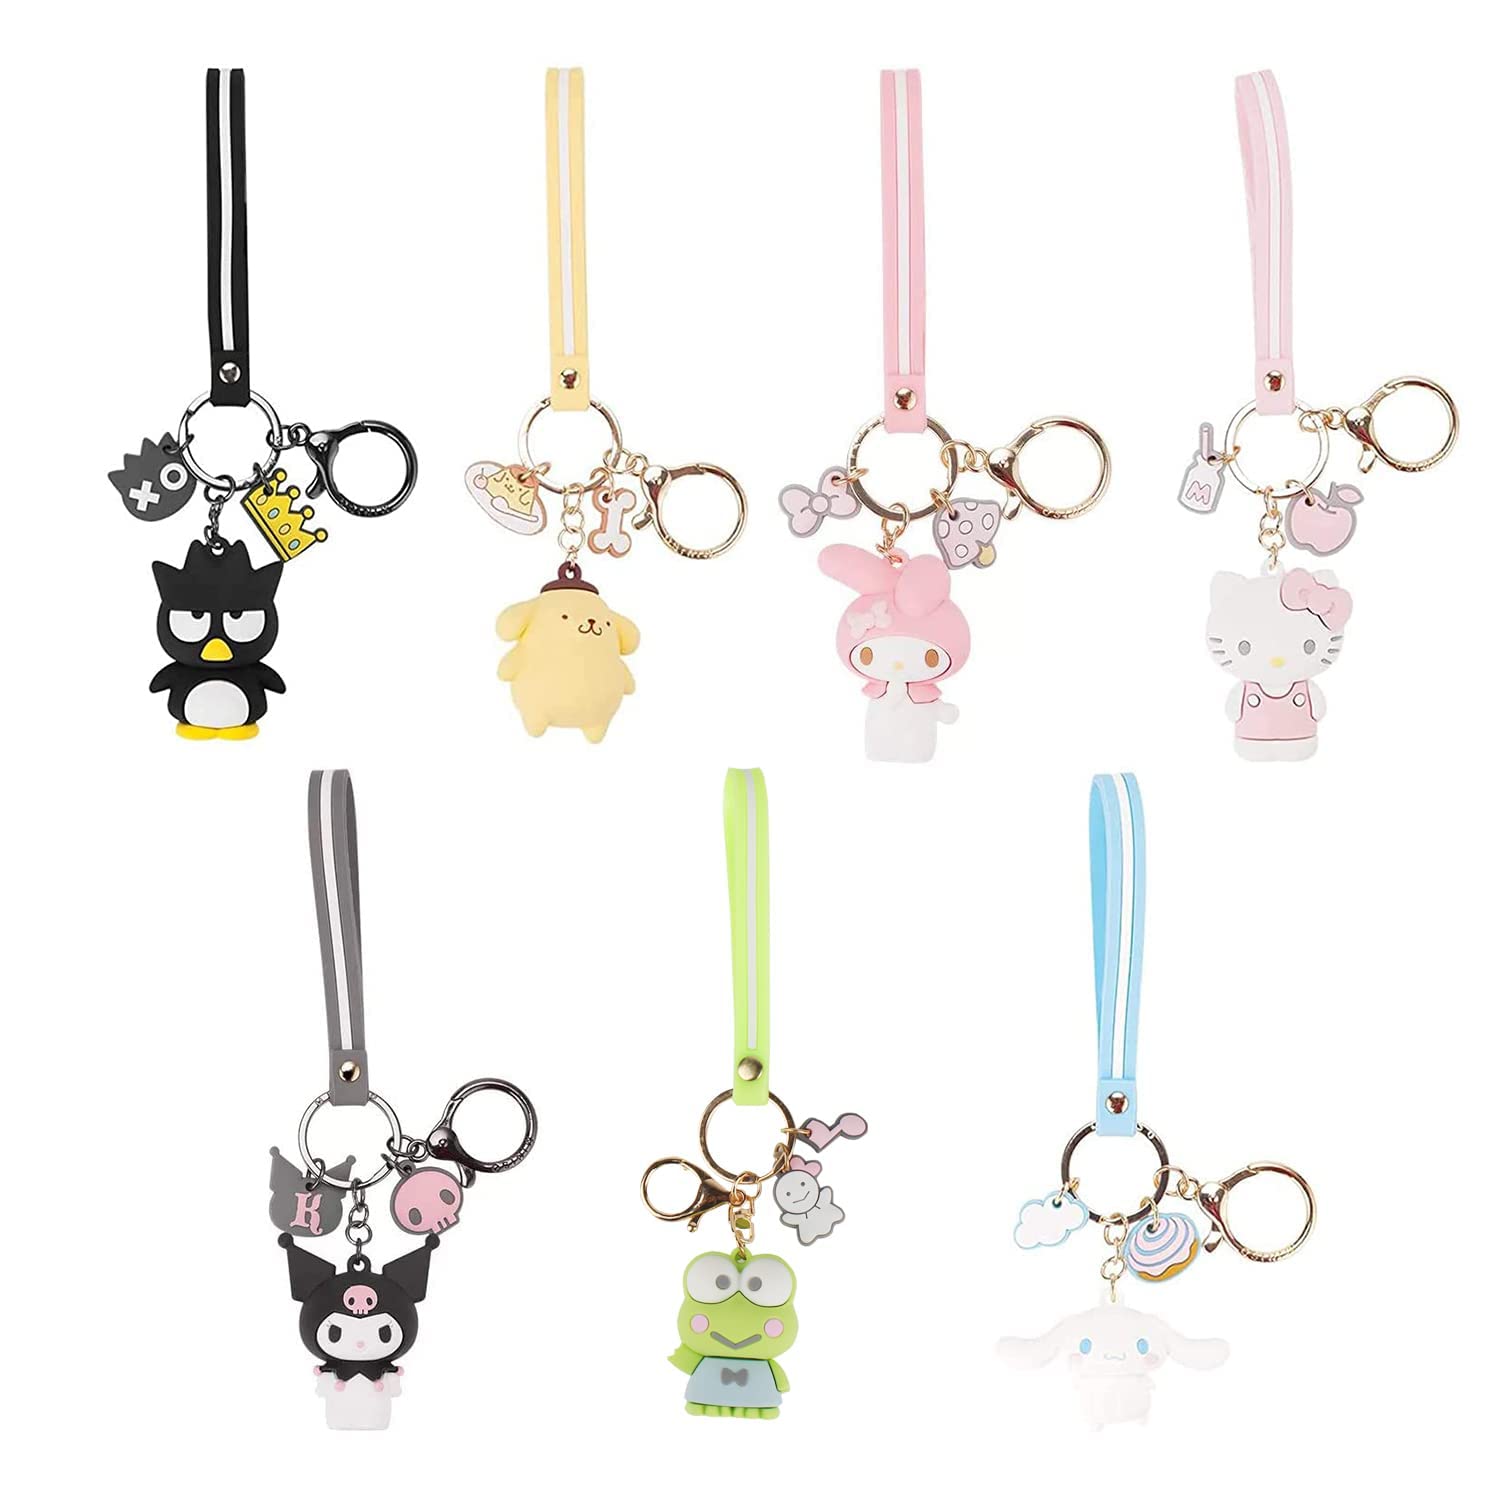 BEXOA Cute Keychain Kawaii Anime Keychains Accessories Cartoon Backpack  Charms Car Key Ring for Kids Boy Girl Women at Amazon Women's Clothing store